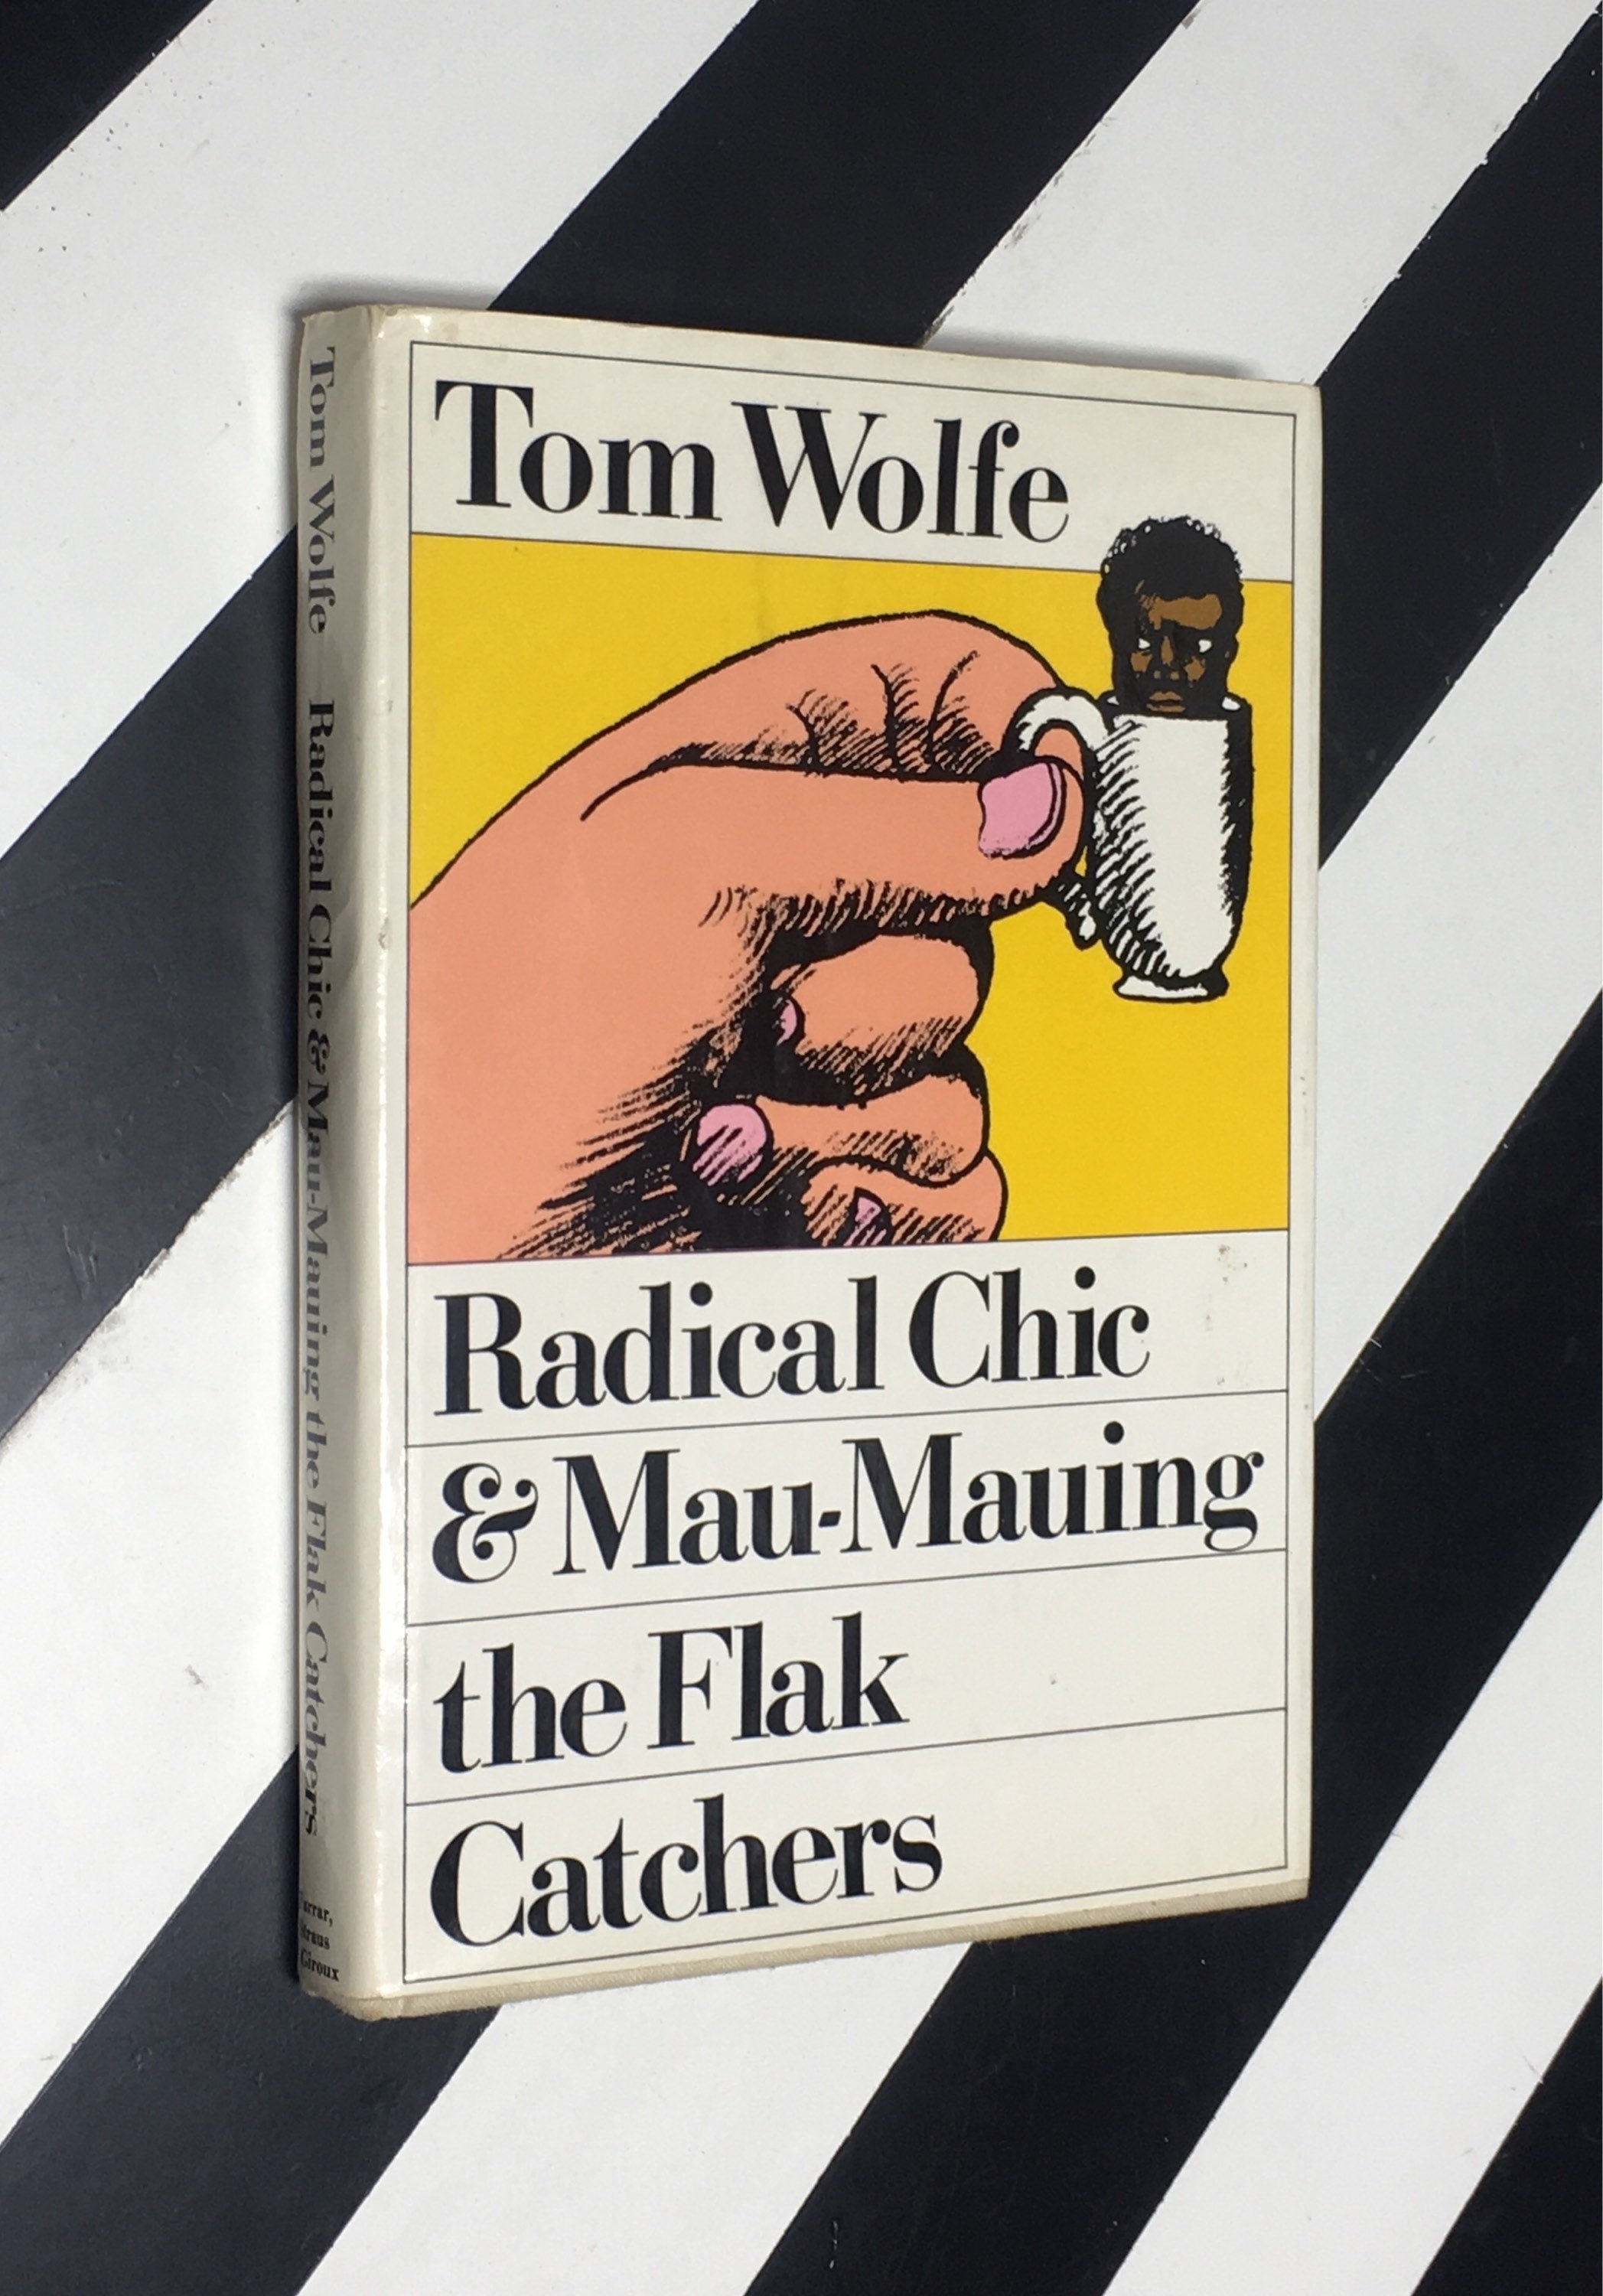 Radical Chic & Mau Mauing the Flak Catchers by Tom Wolfe (1970)